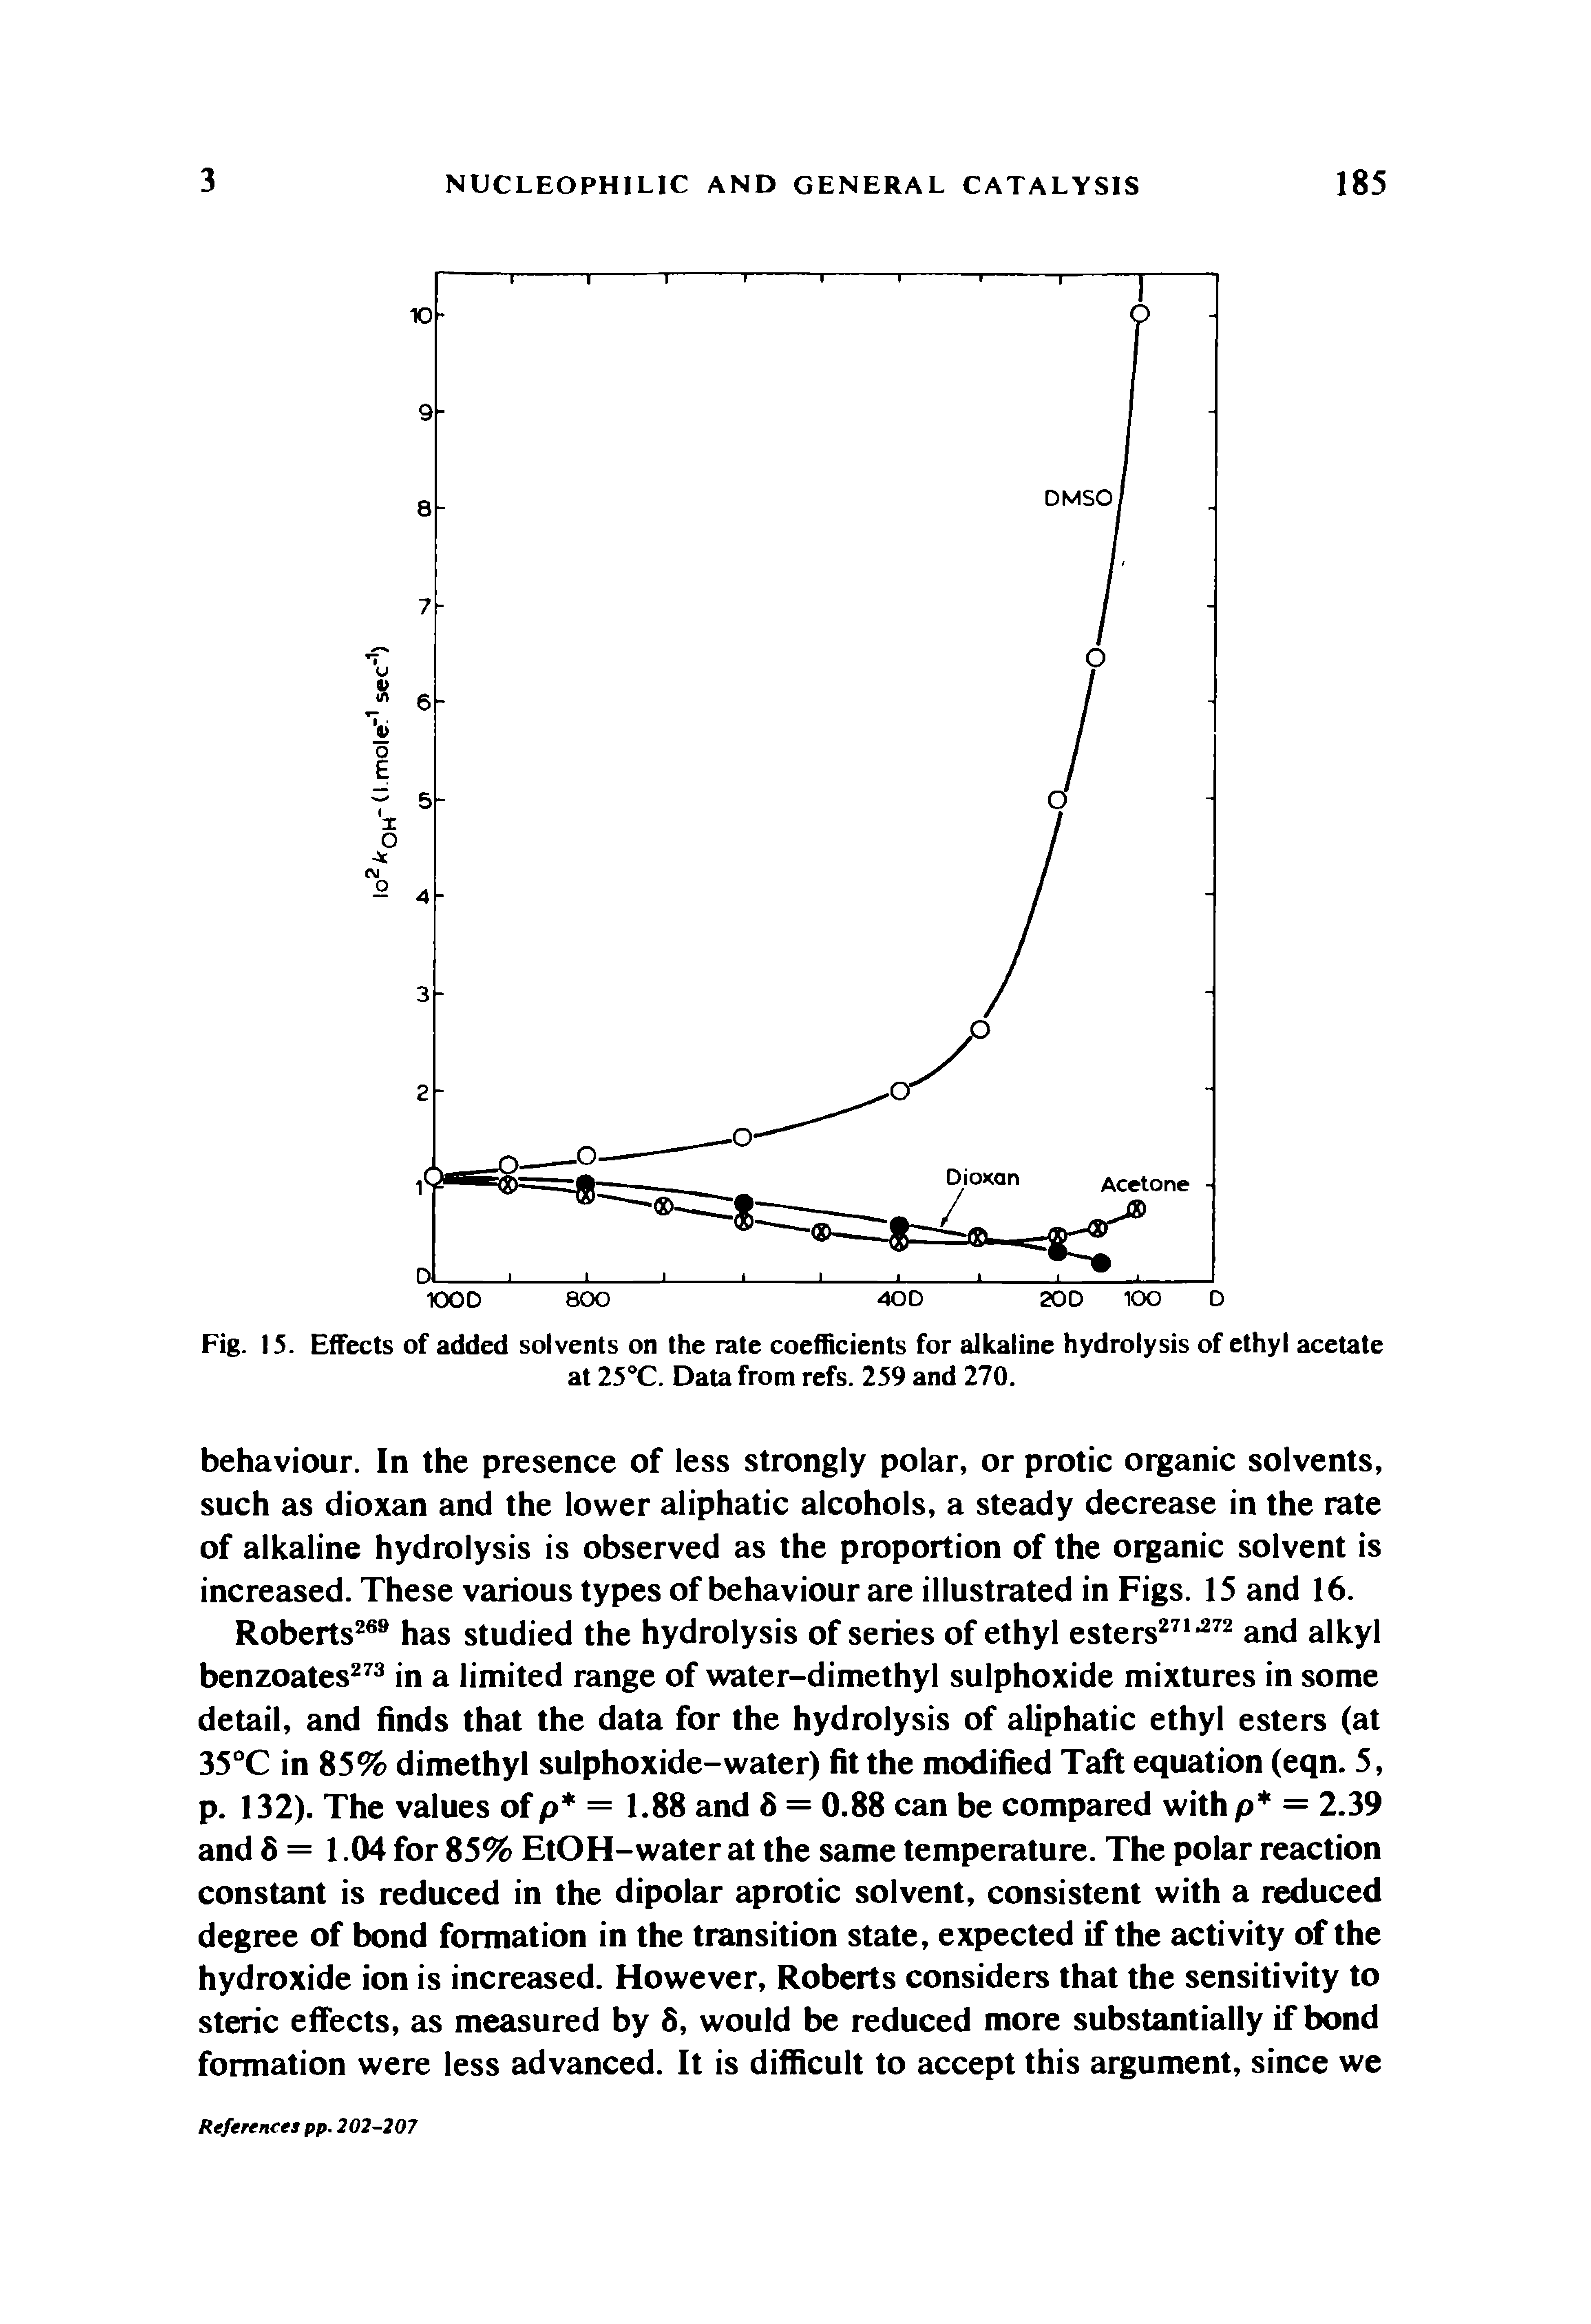 Fig. 15. Effects of added solvents on the rate coefficients for alkaline hydrolysis of ethyl acetate...